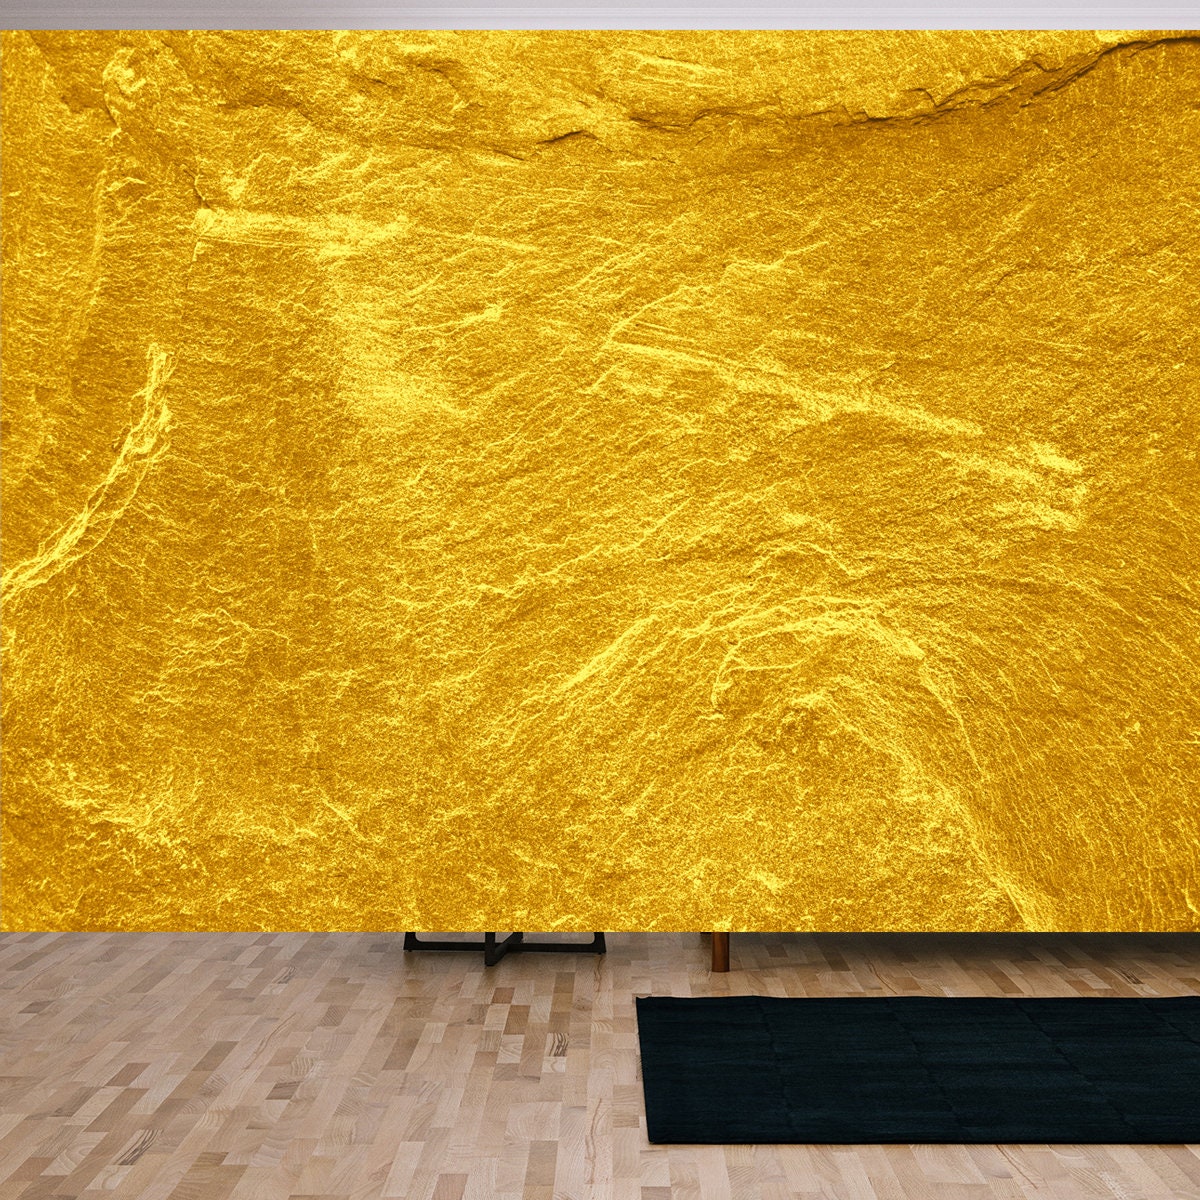 Gold Stone Texture for Background Wallpaper Living Room Mural